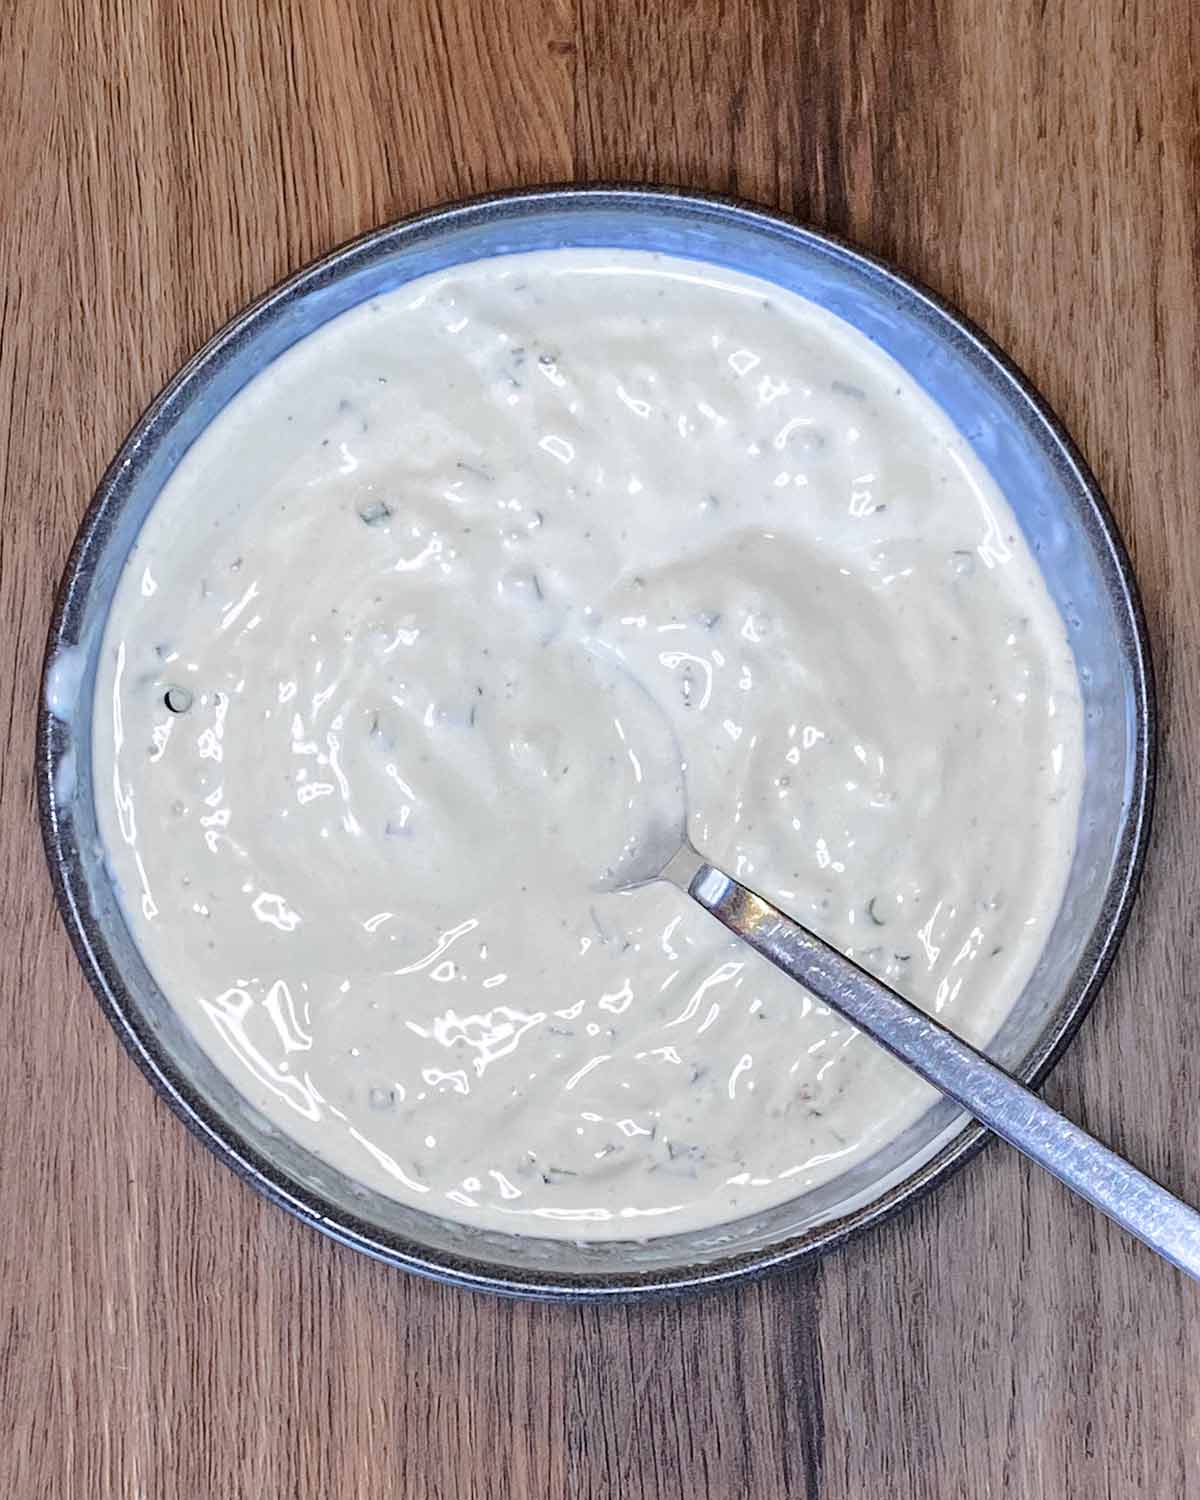 Everything mixed together to form a creamy dip.